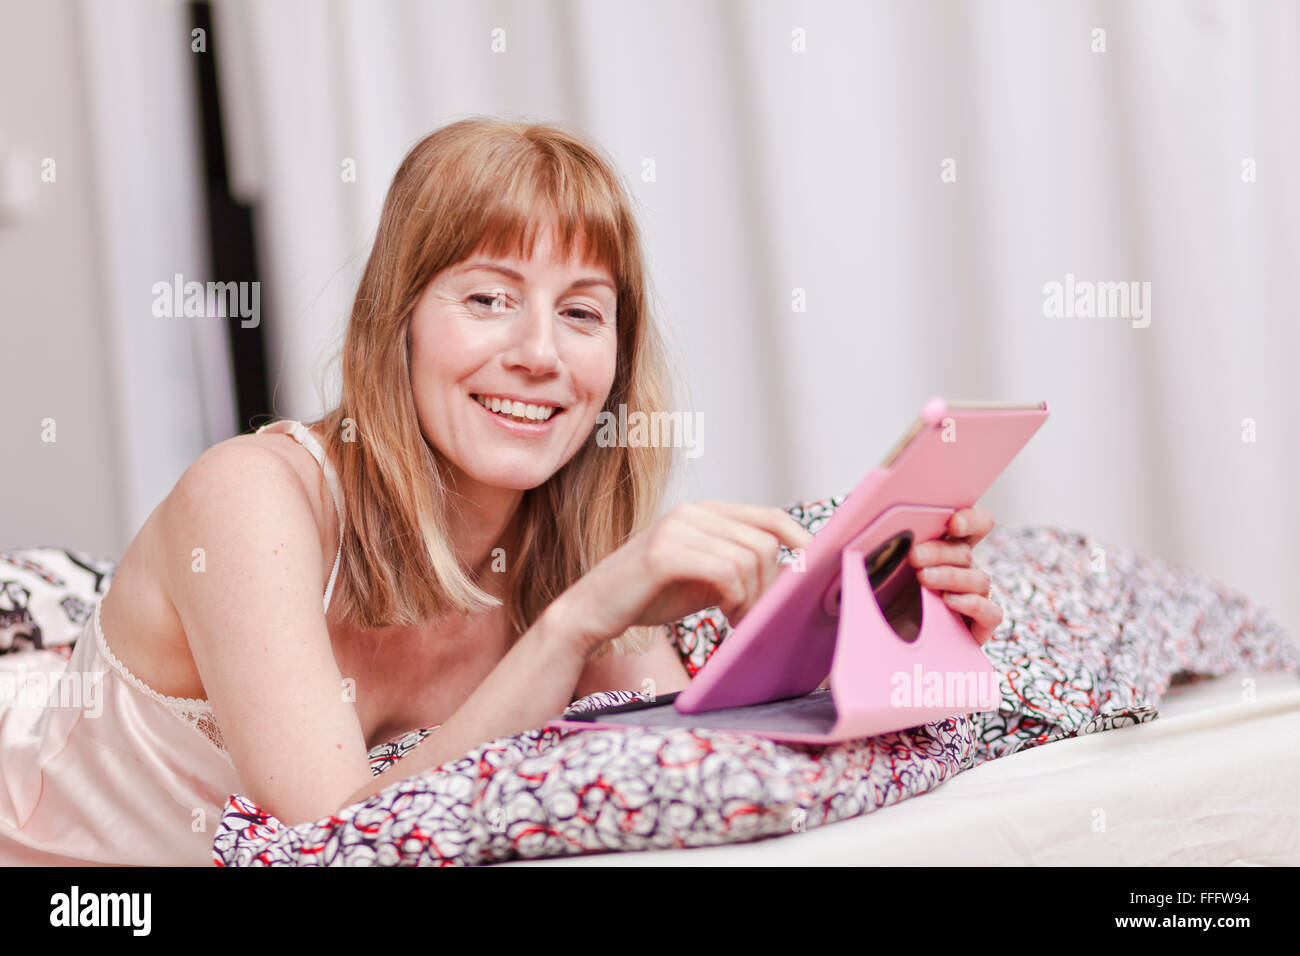 Mid age blond, a caucasian woman on a bed using a pink tablet. Stock Photo